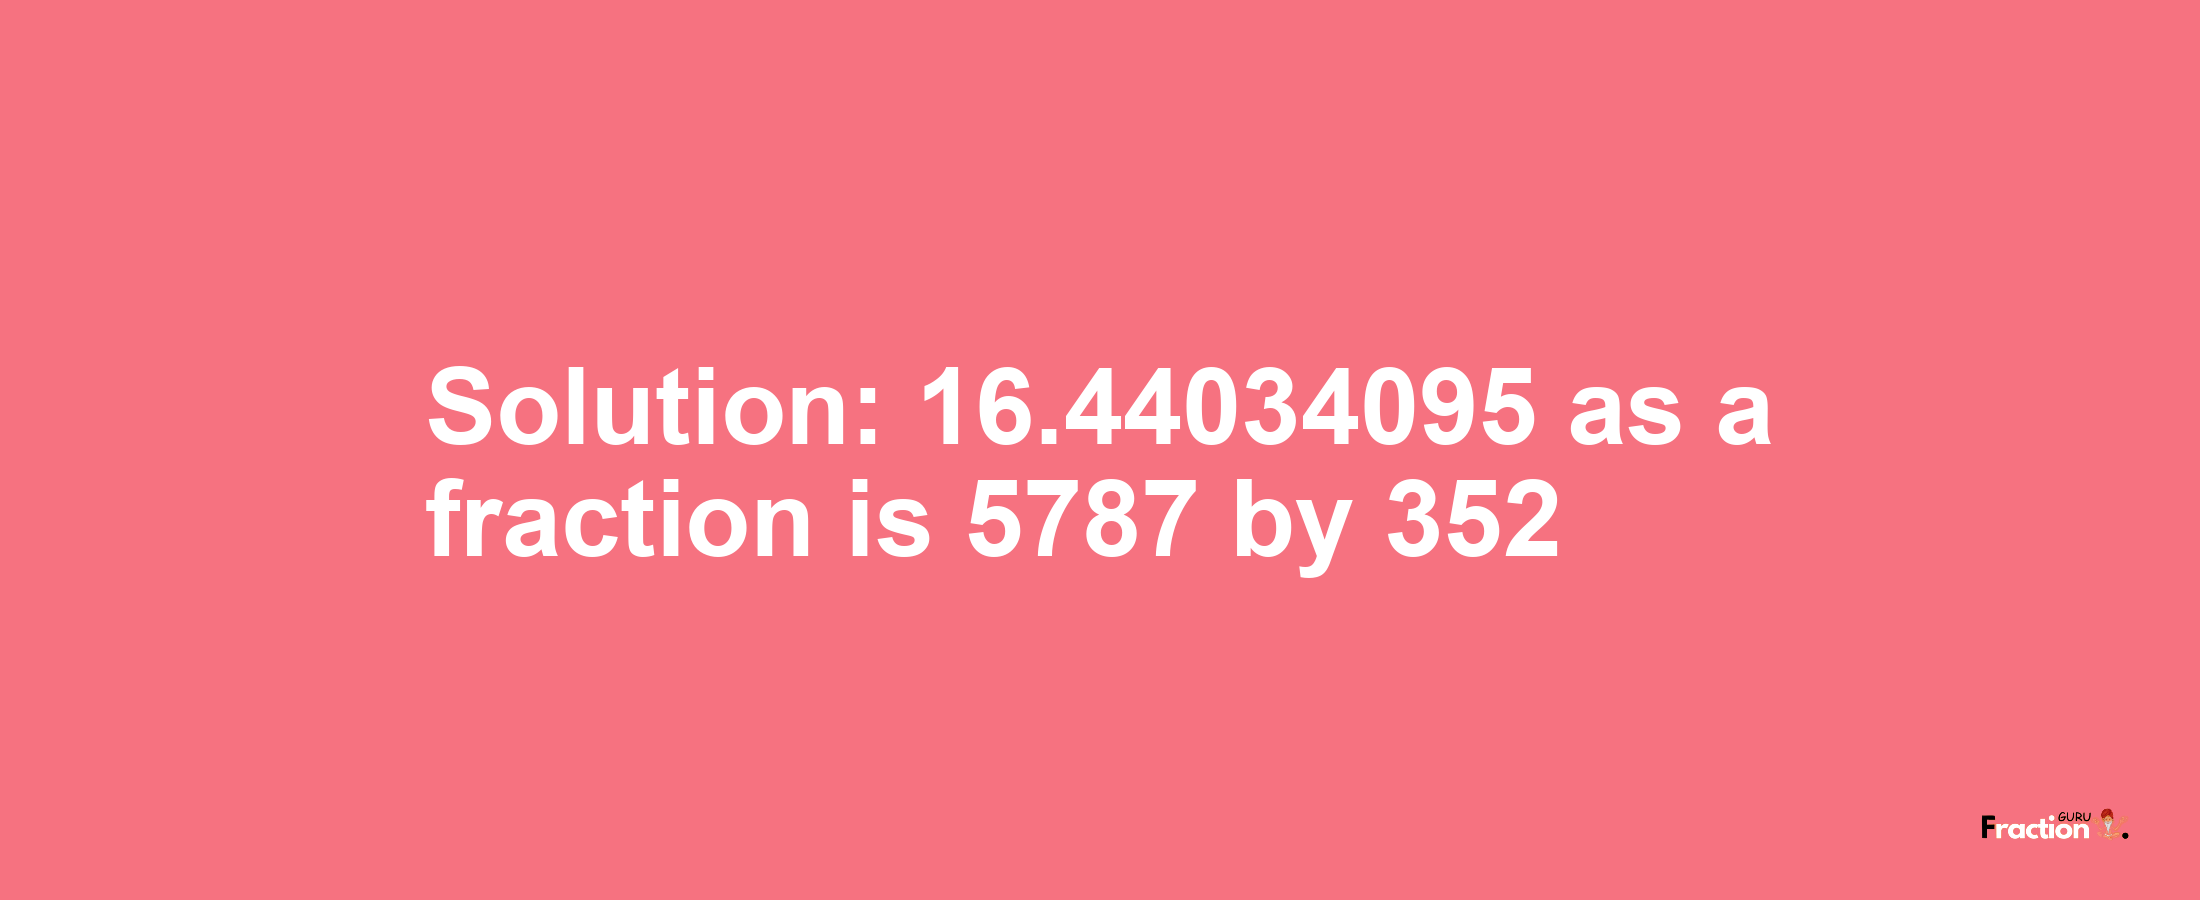 Solution:16.44034095 as a fraction is 5787/352